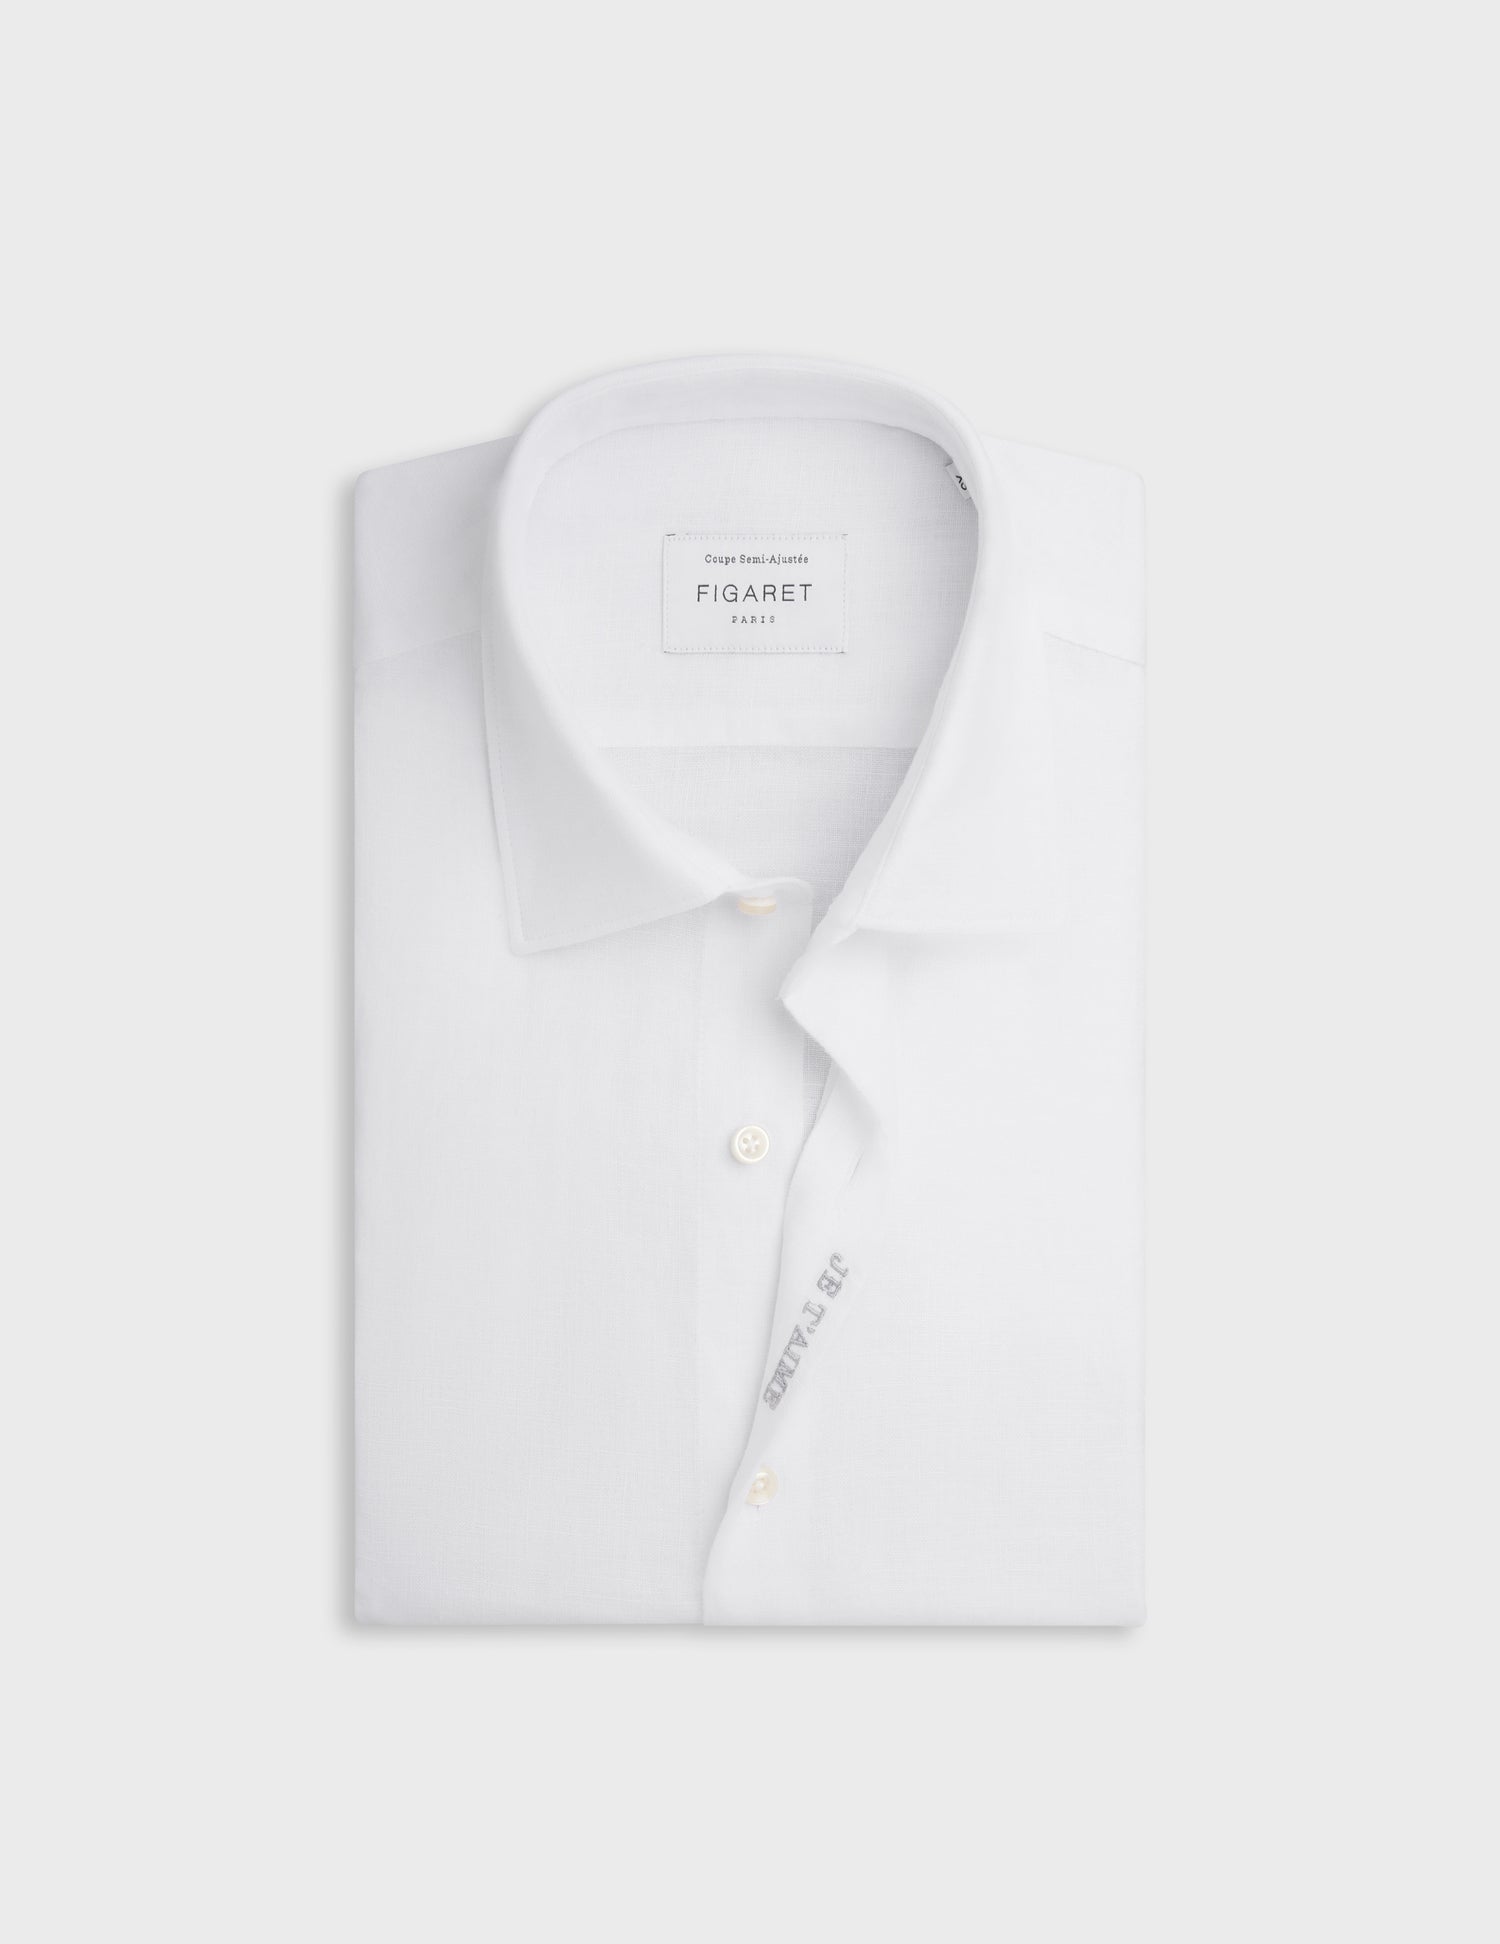 White linen "Je t'aime" shirt with grey embroidery - Linen - Figaret Collar#7